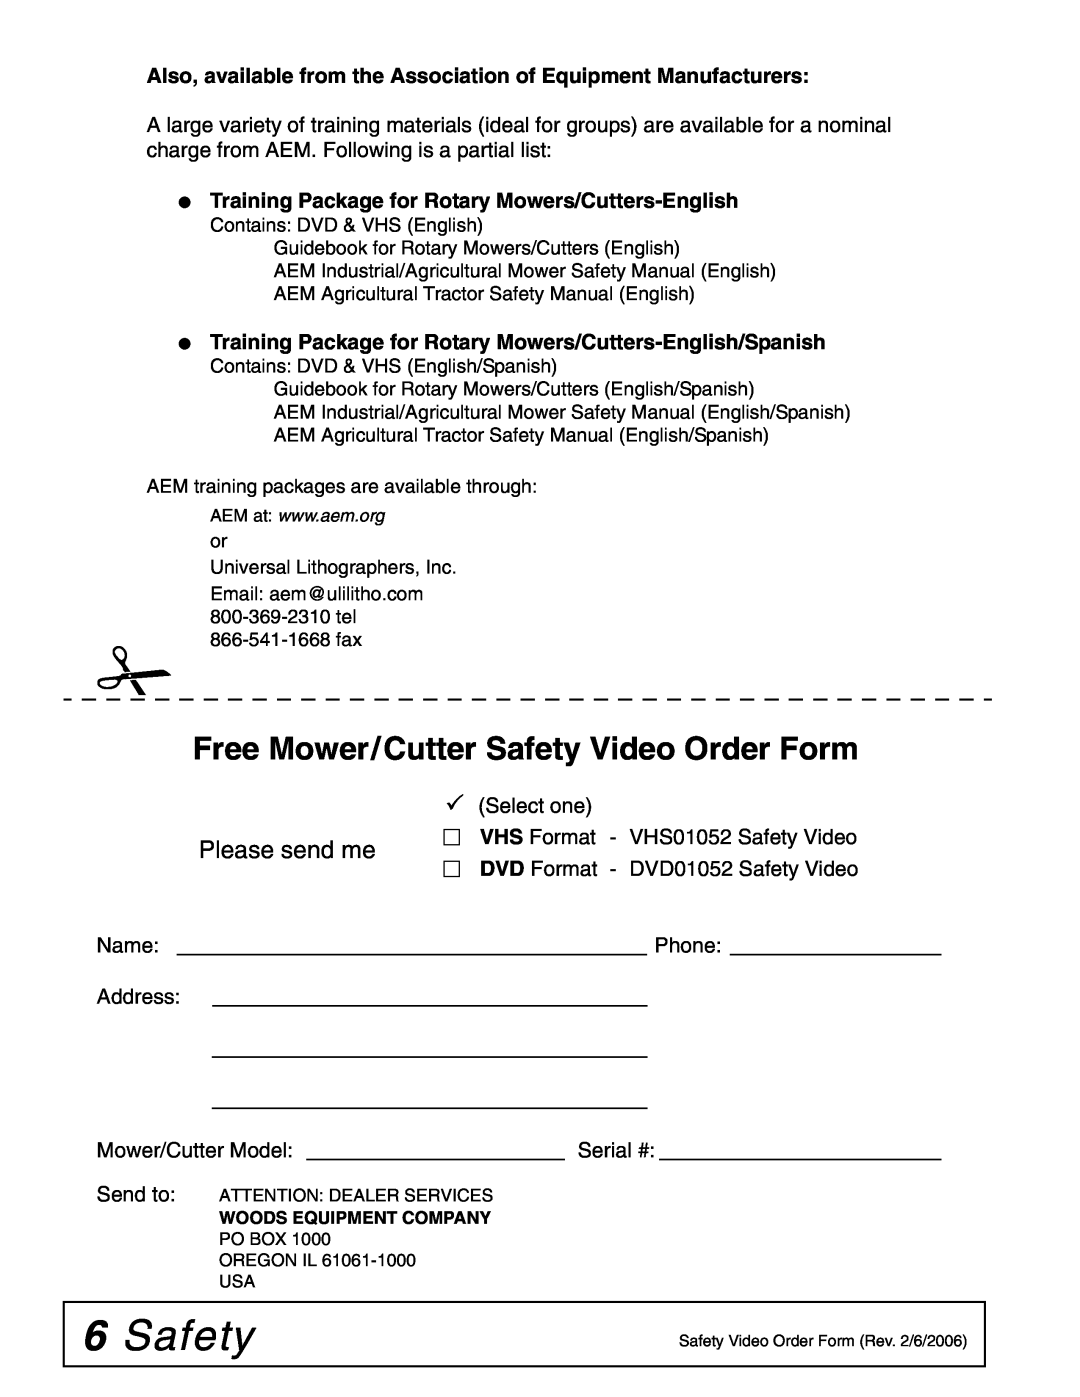 Woods Equipment BW126Q-3, BW180Q-3, BW126-3, BW180-3 manual Free Mower/Cutter Safety Video Order Form, Please send me 